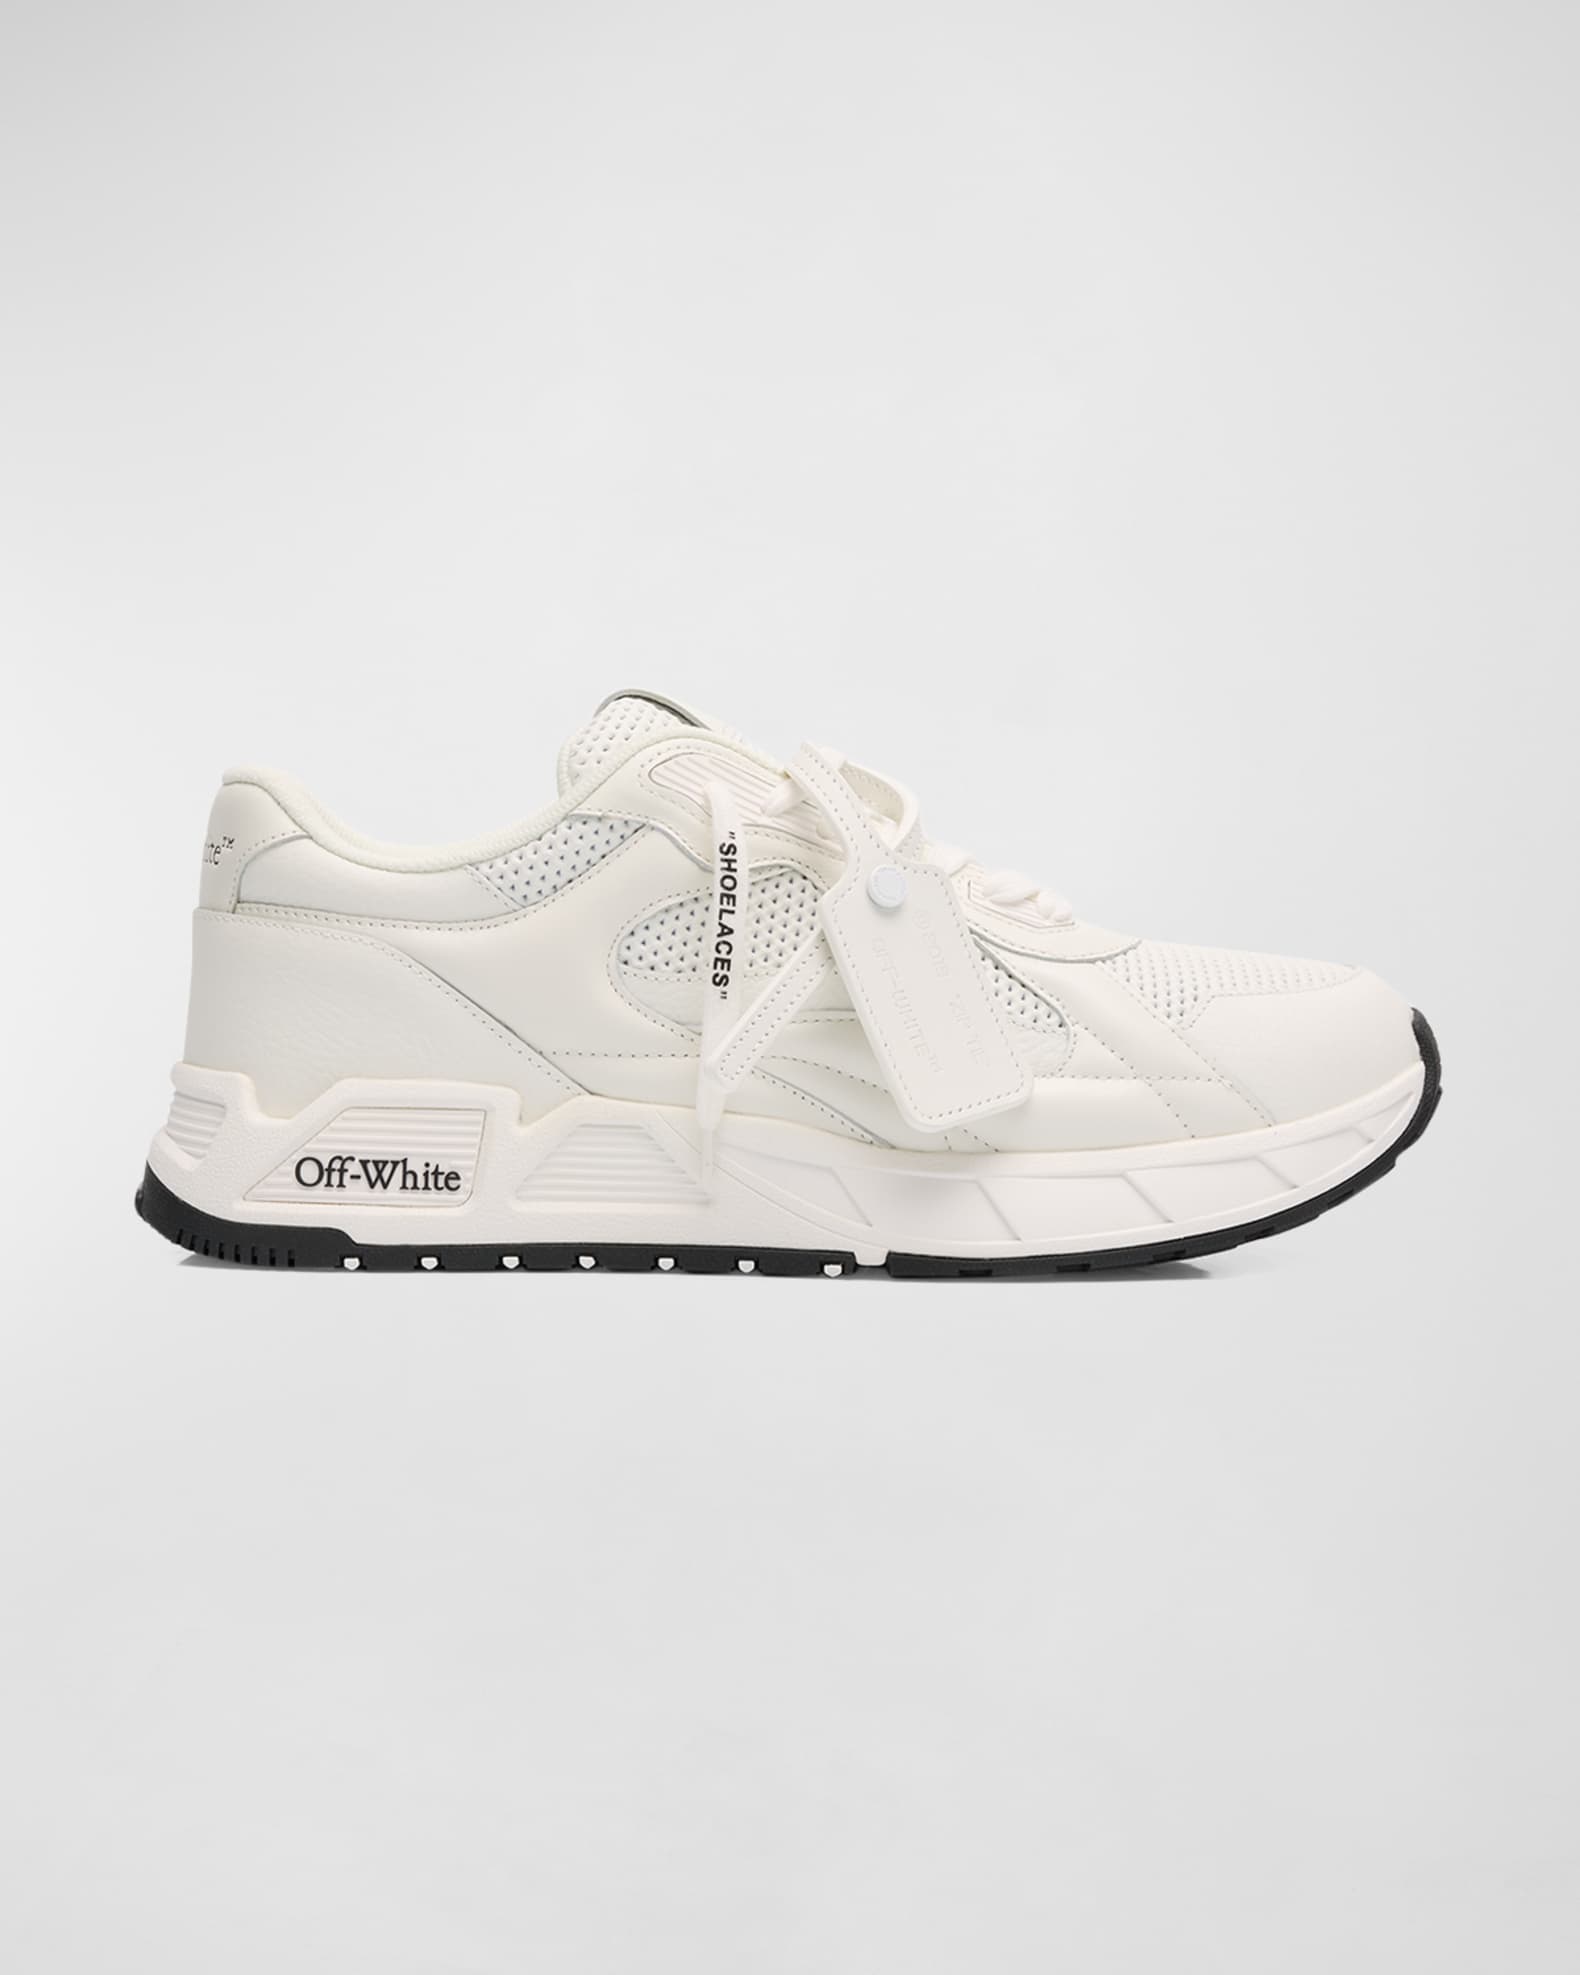 Off-White Men's Kick Off Leather Runner Sneakers | Neiman Marcus